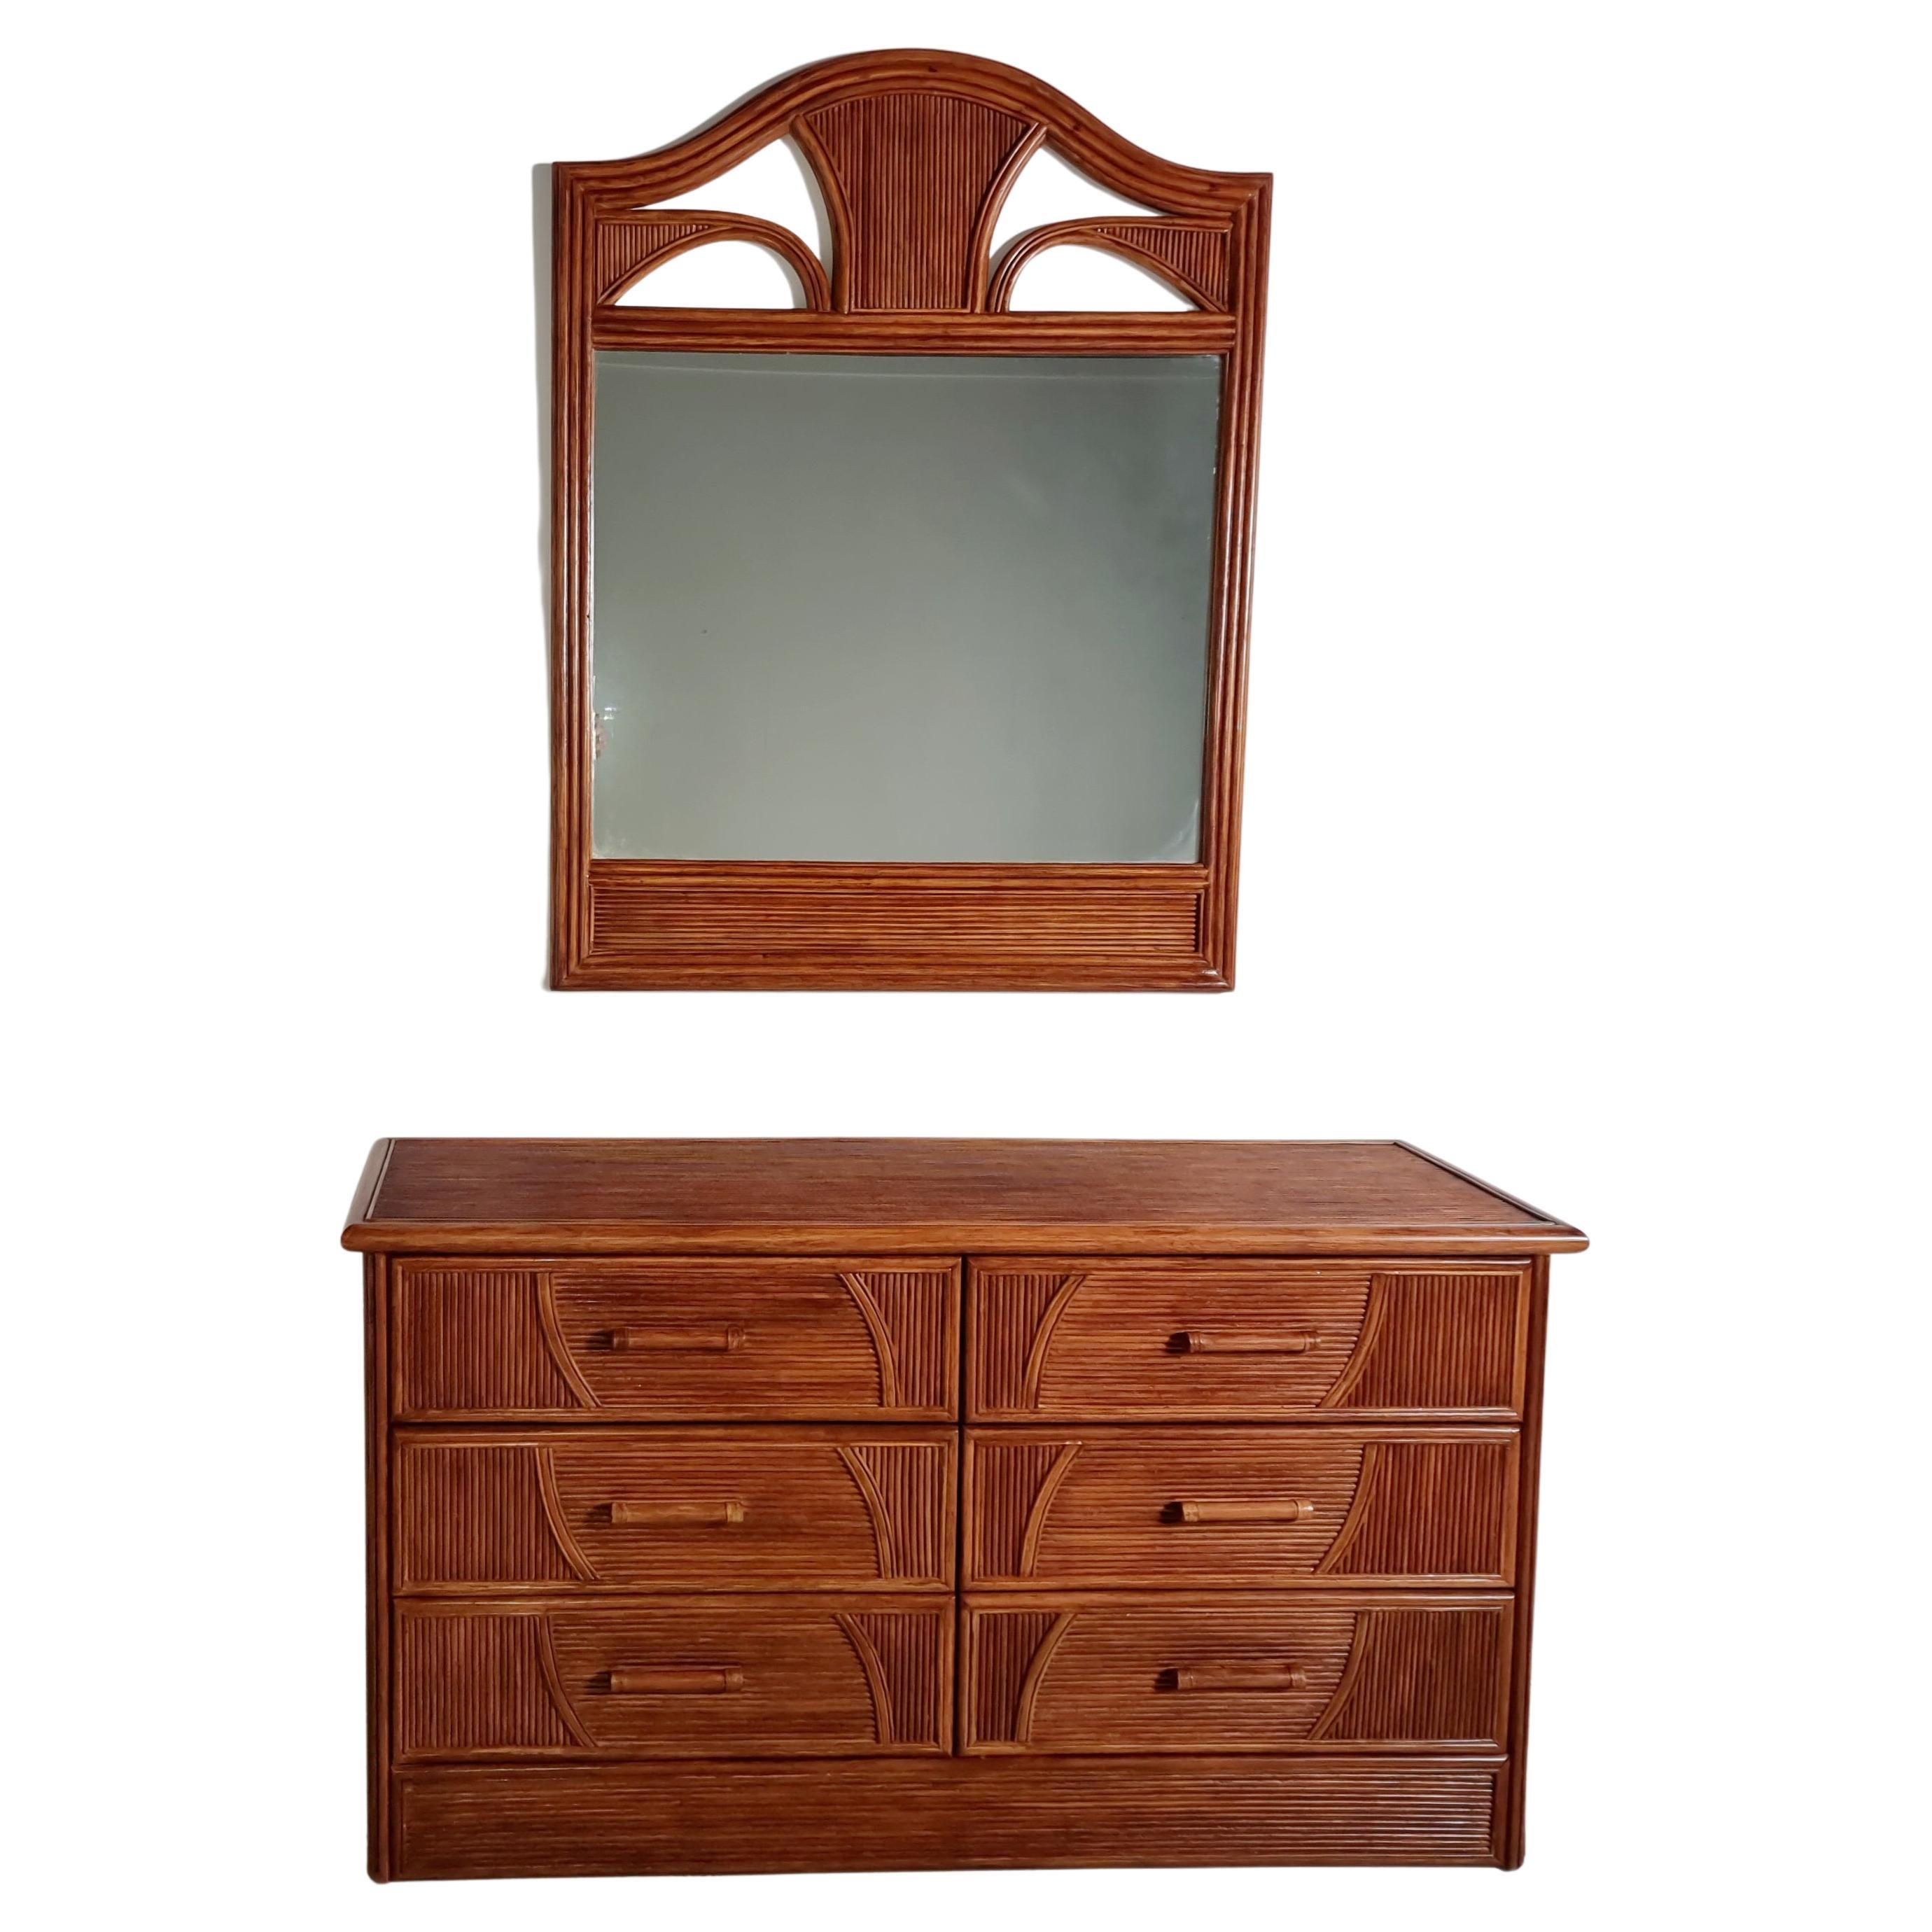 Walnut veneer Dresser with Matching Mirror from Italy, 1970s